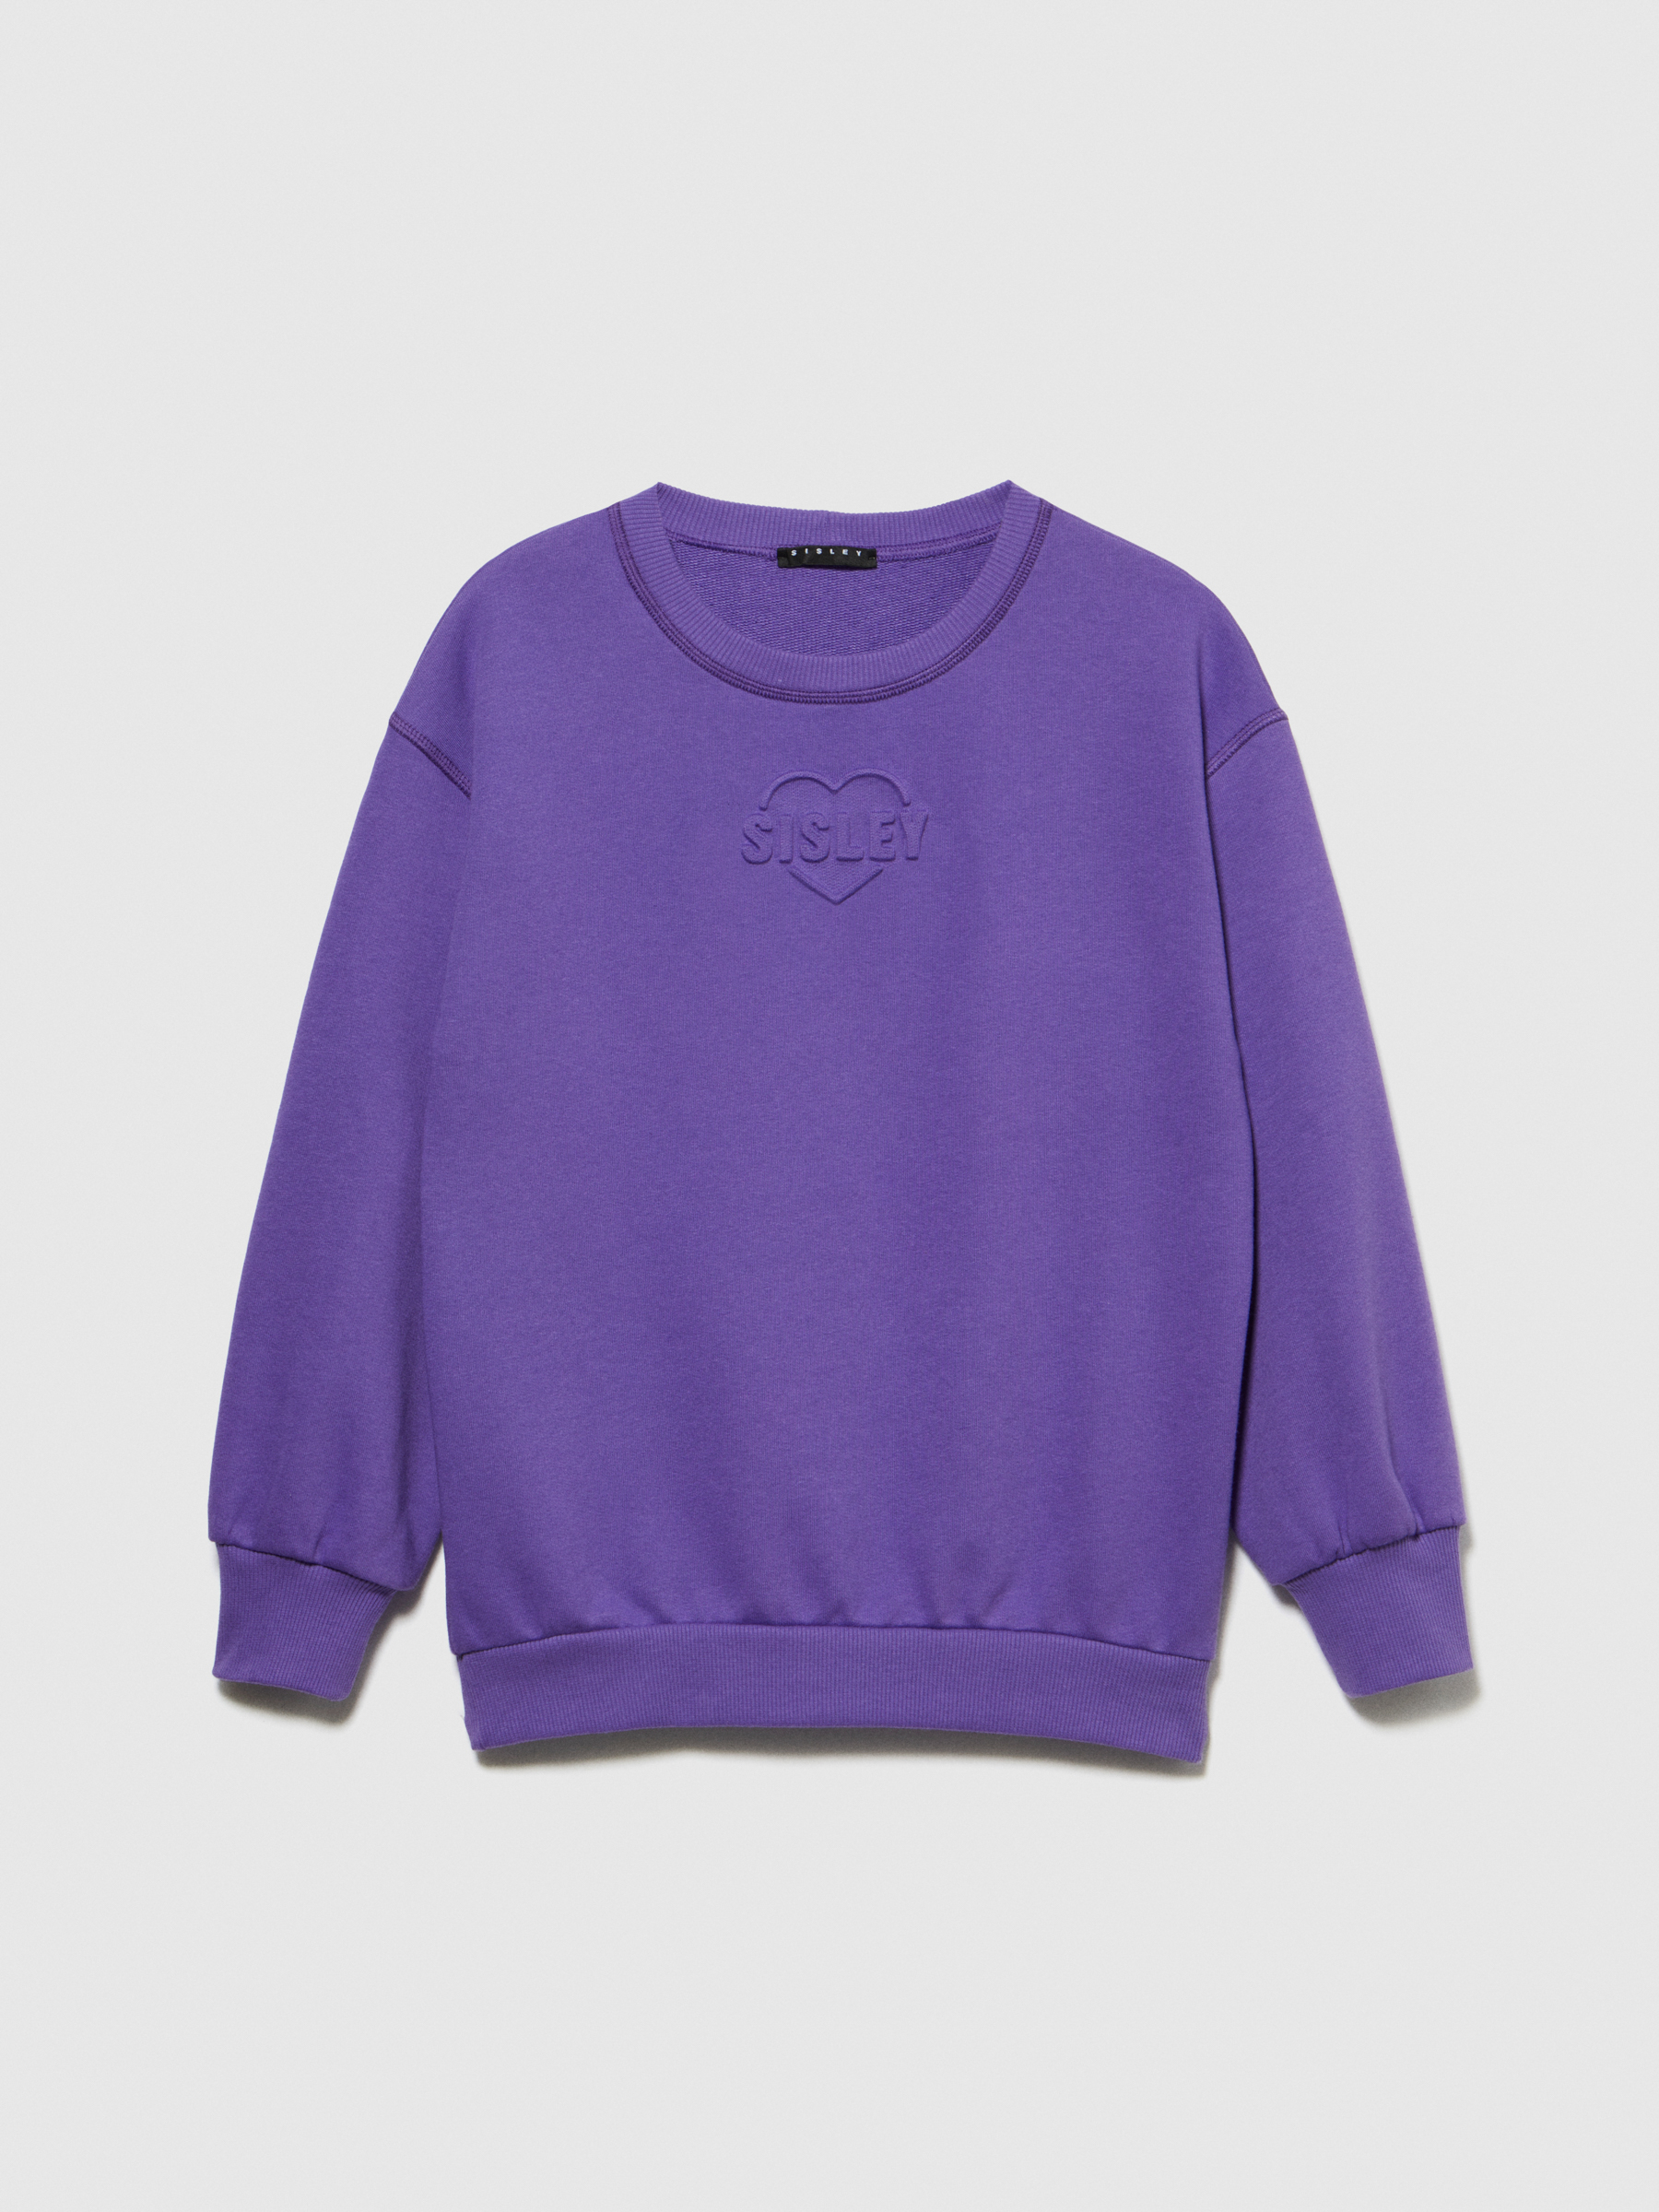 Sisley Young - Sweatshirt With Embossed Print, Woman, Violet, Size: L